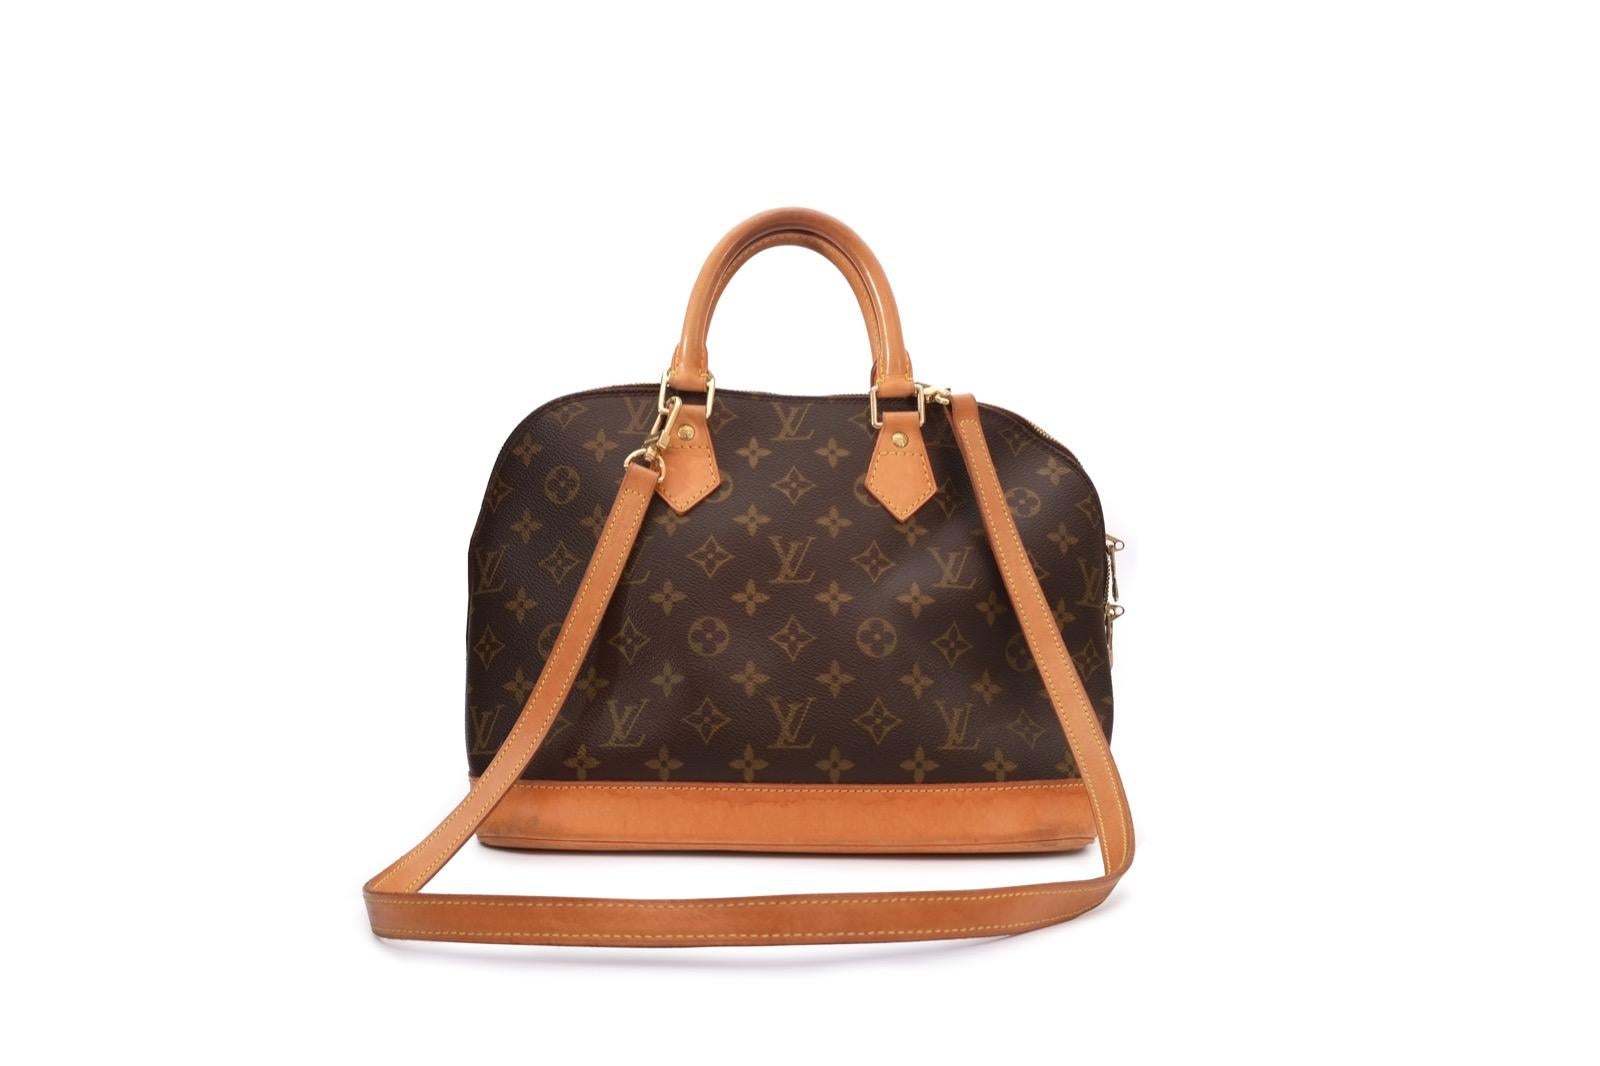 Famous Louis Vuitton Alma medium model handbag in brown monogram canvas and natural leather, gold metal trim, natural leather shoulder strap, double handle in natural leather allowing hand or shoulder carry.

Double zipper.
Inner lining in brown